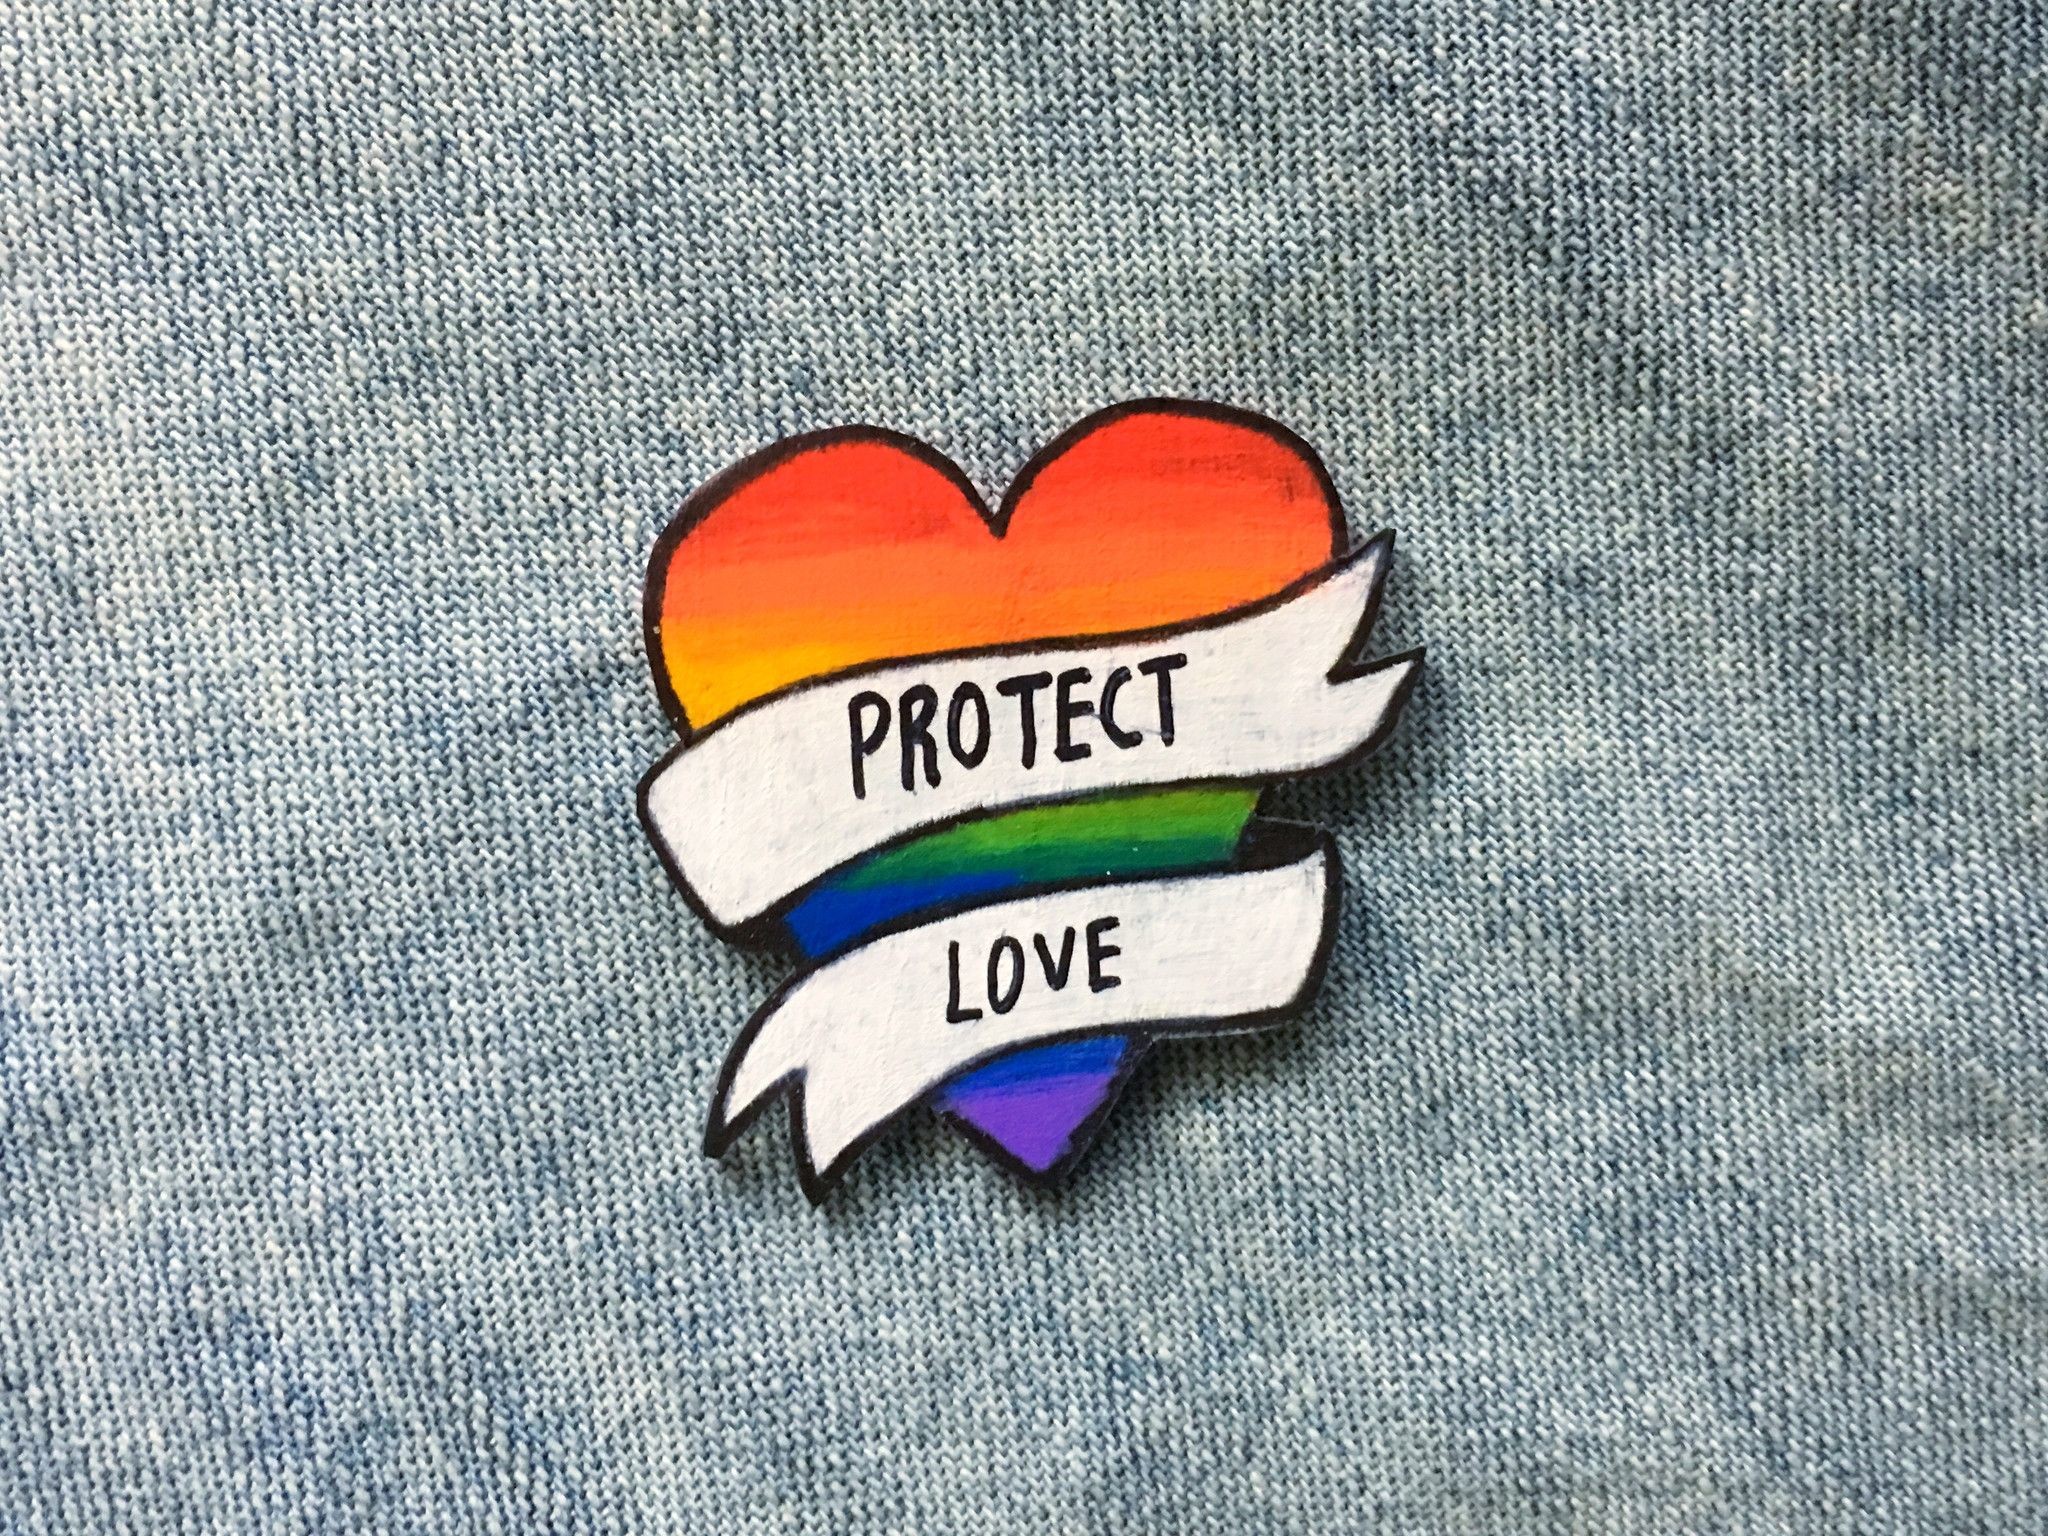 2048x1536 LGBT Rainbow Heart Pin with "Protect Love" Banner